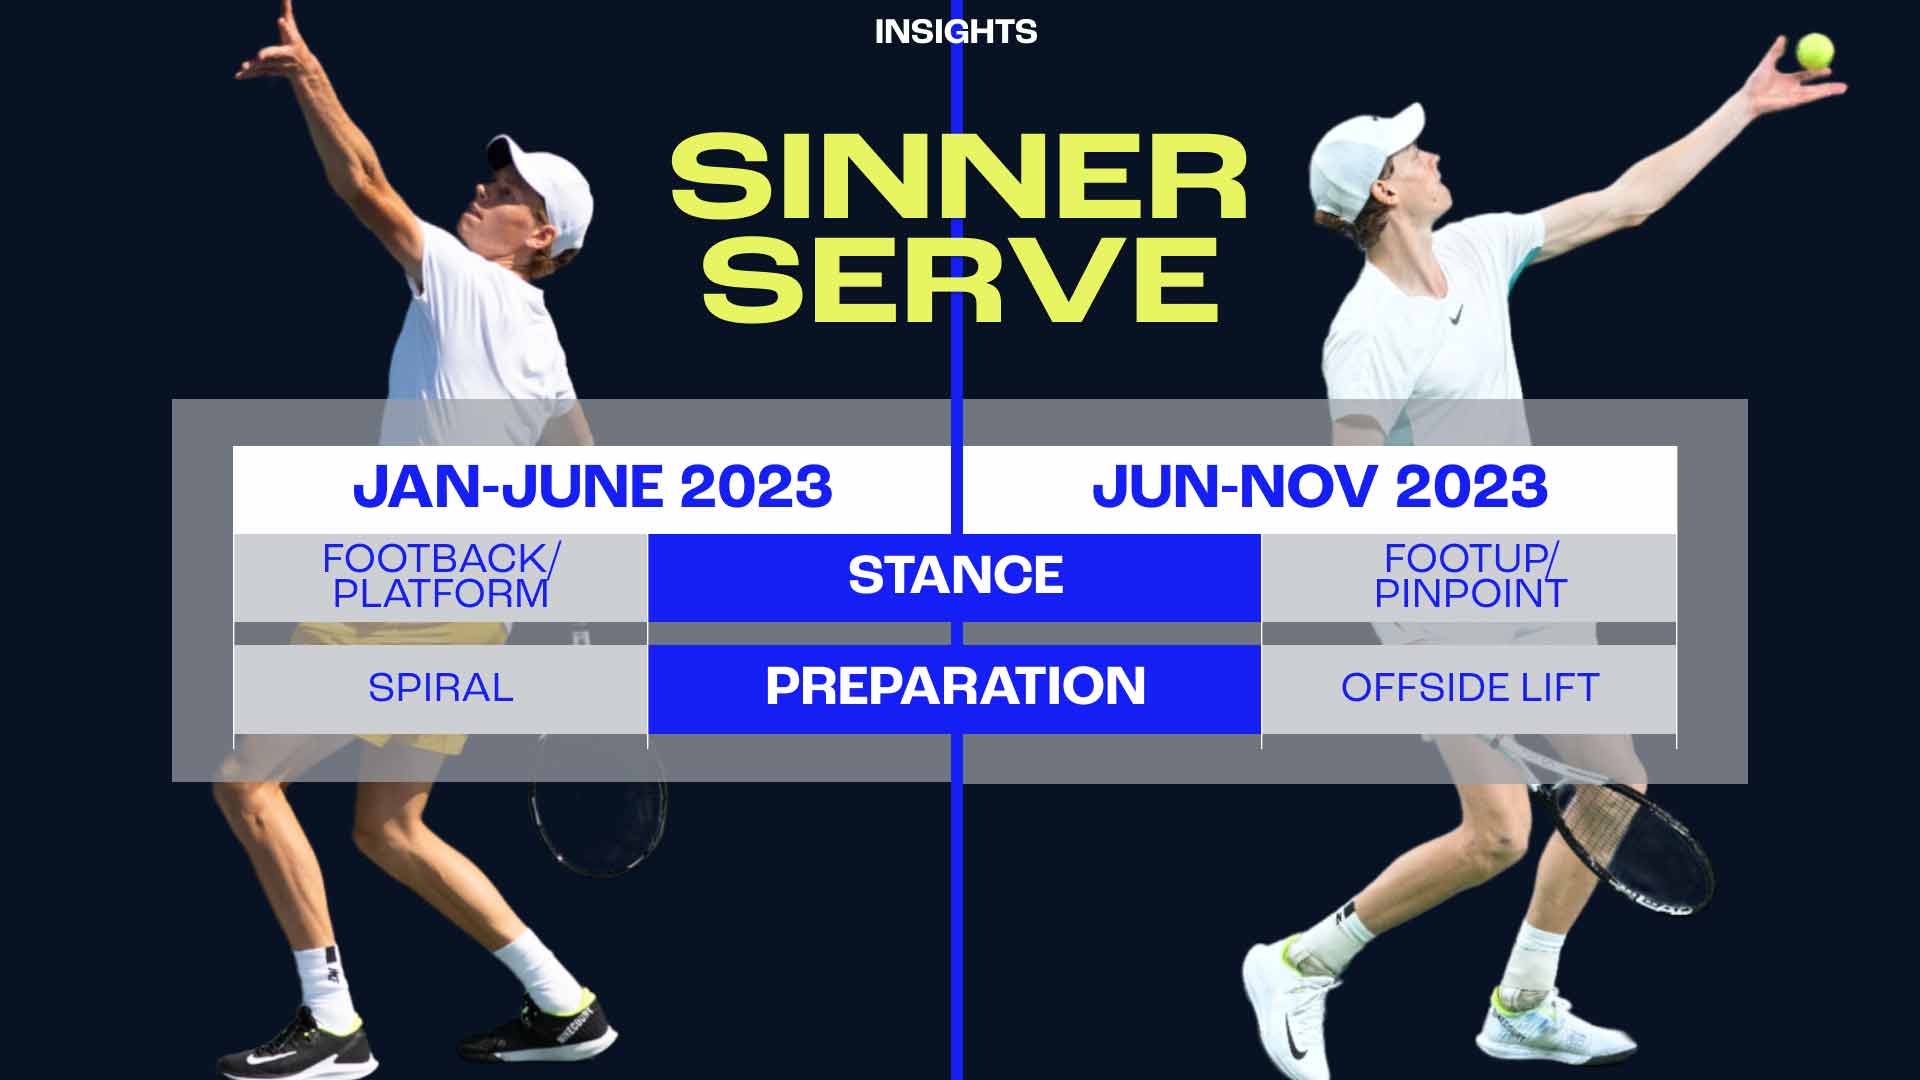 Sinner Boosts Turin Hopes, Mover Of Week, News Article, Nitto ATP Finals